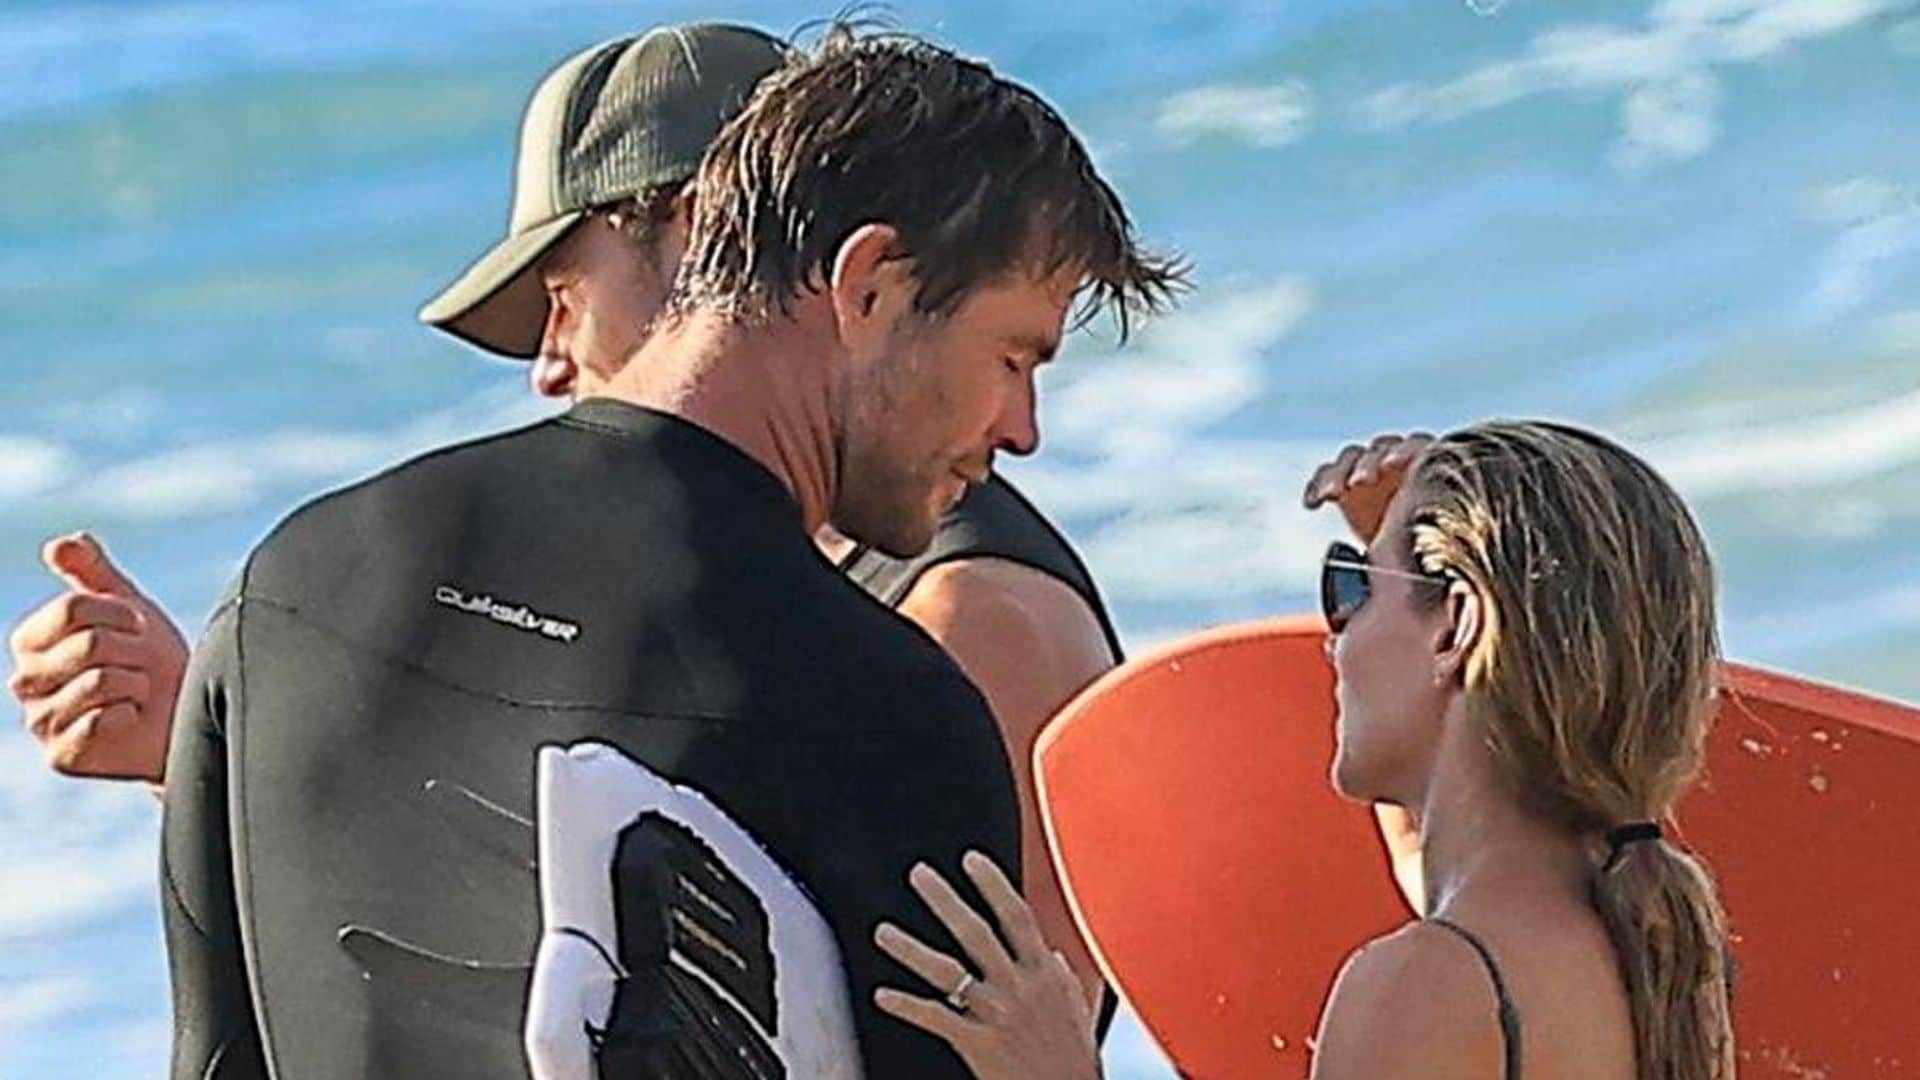 Elsa Pataky and Chris Hemsworth look gorgeous and in love while out surfing